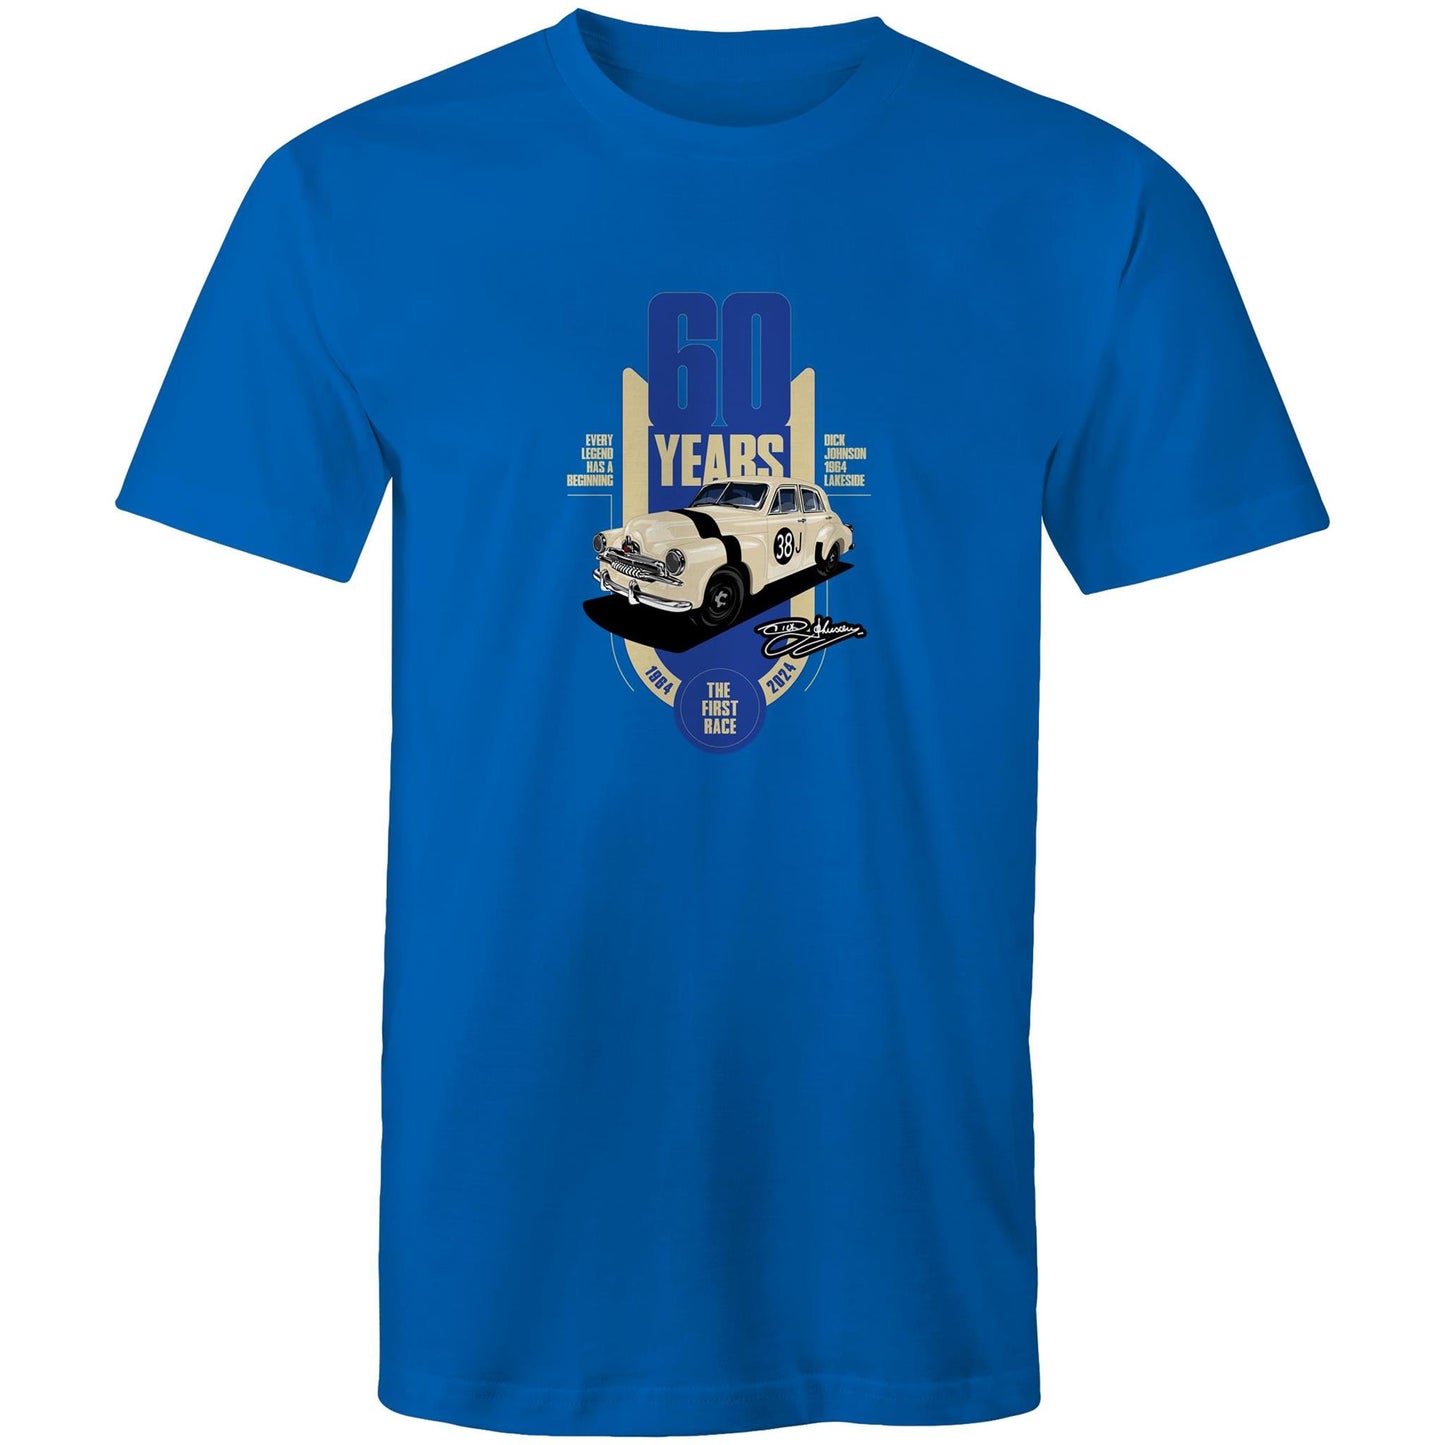 60th Anniversary of Dick Johnson's First Race Tee